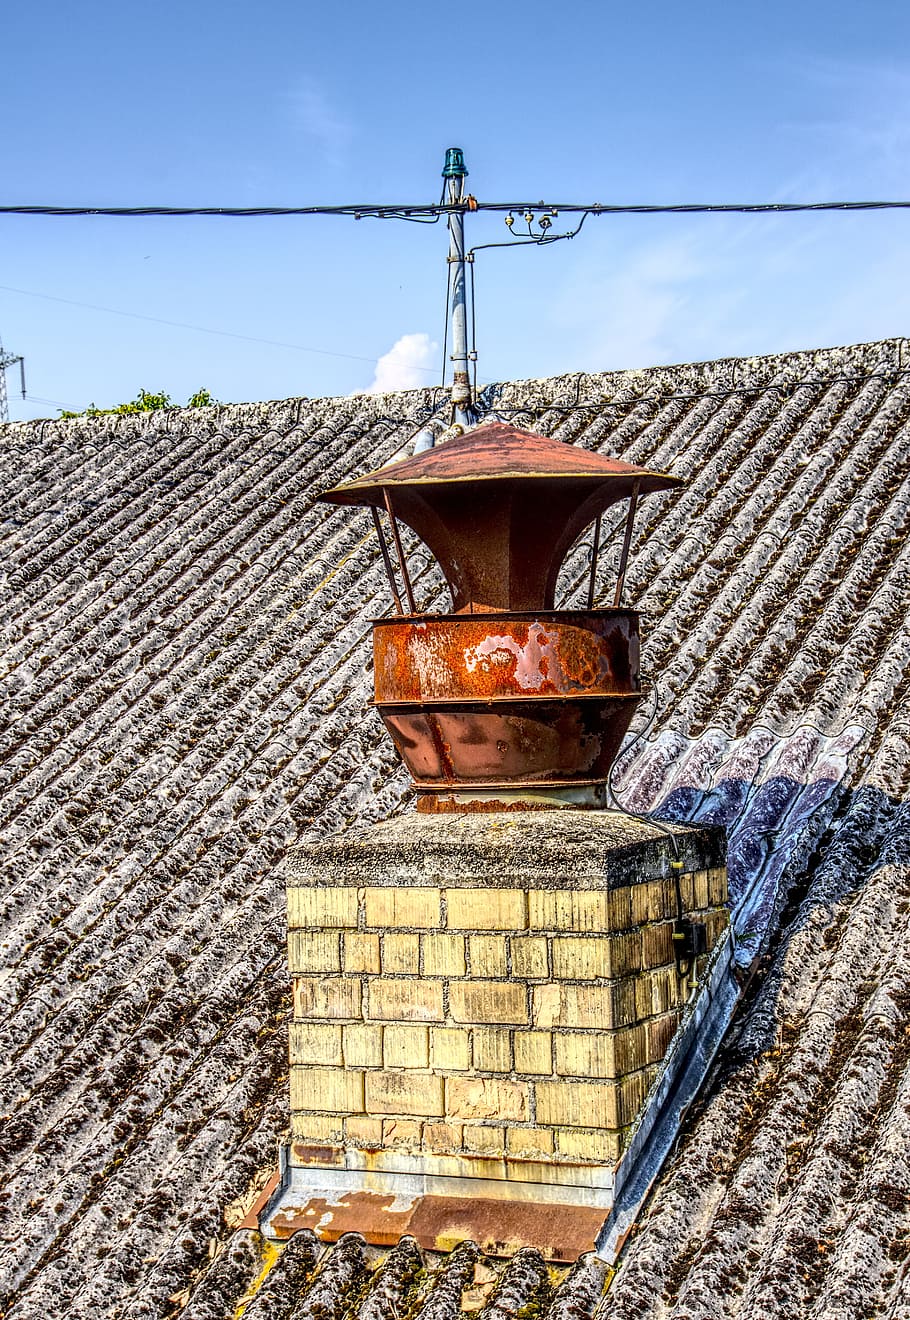 chimney, fireplace, iron, stainless, old, roof, brick, roofs